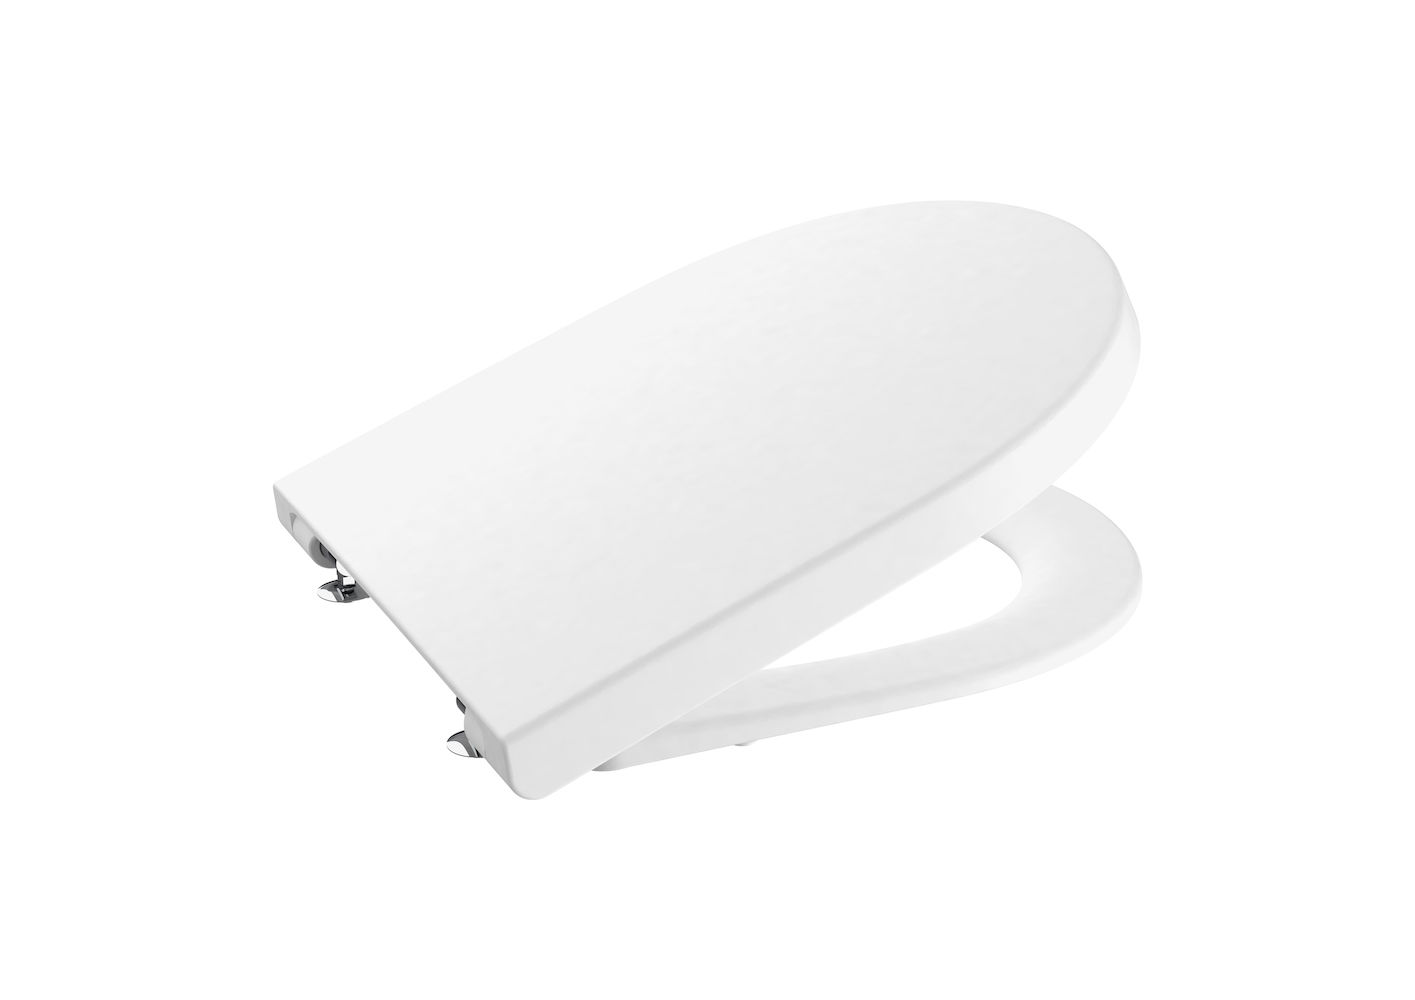 ROUND - Soft-closing seat and cover for toilet- WHITE